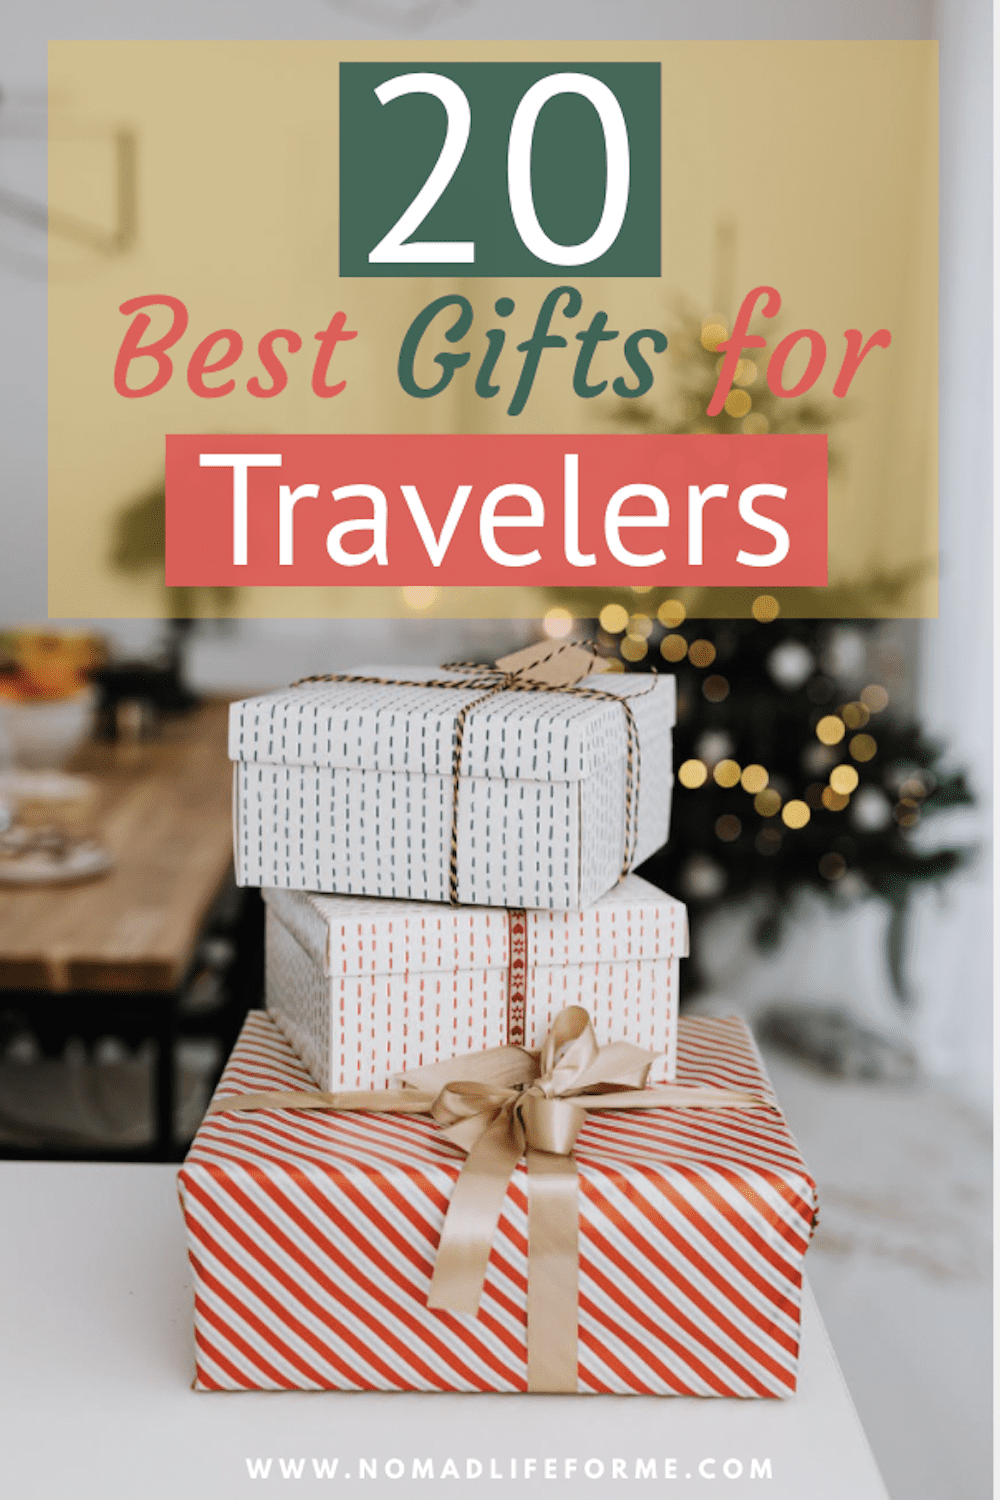 20 Best Gifts for Travelers